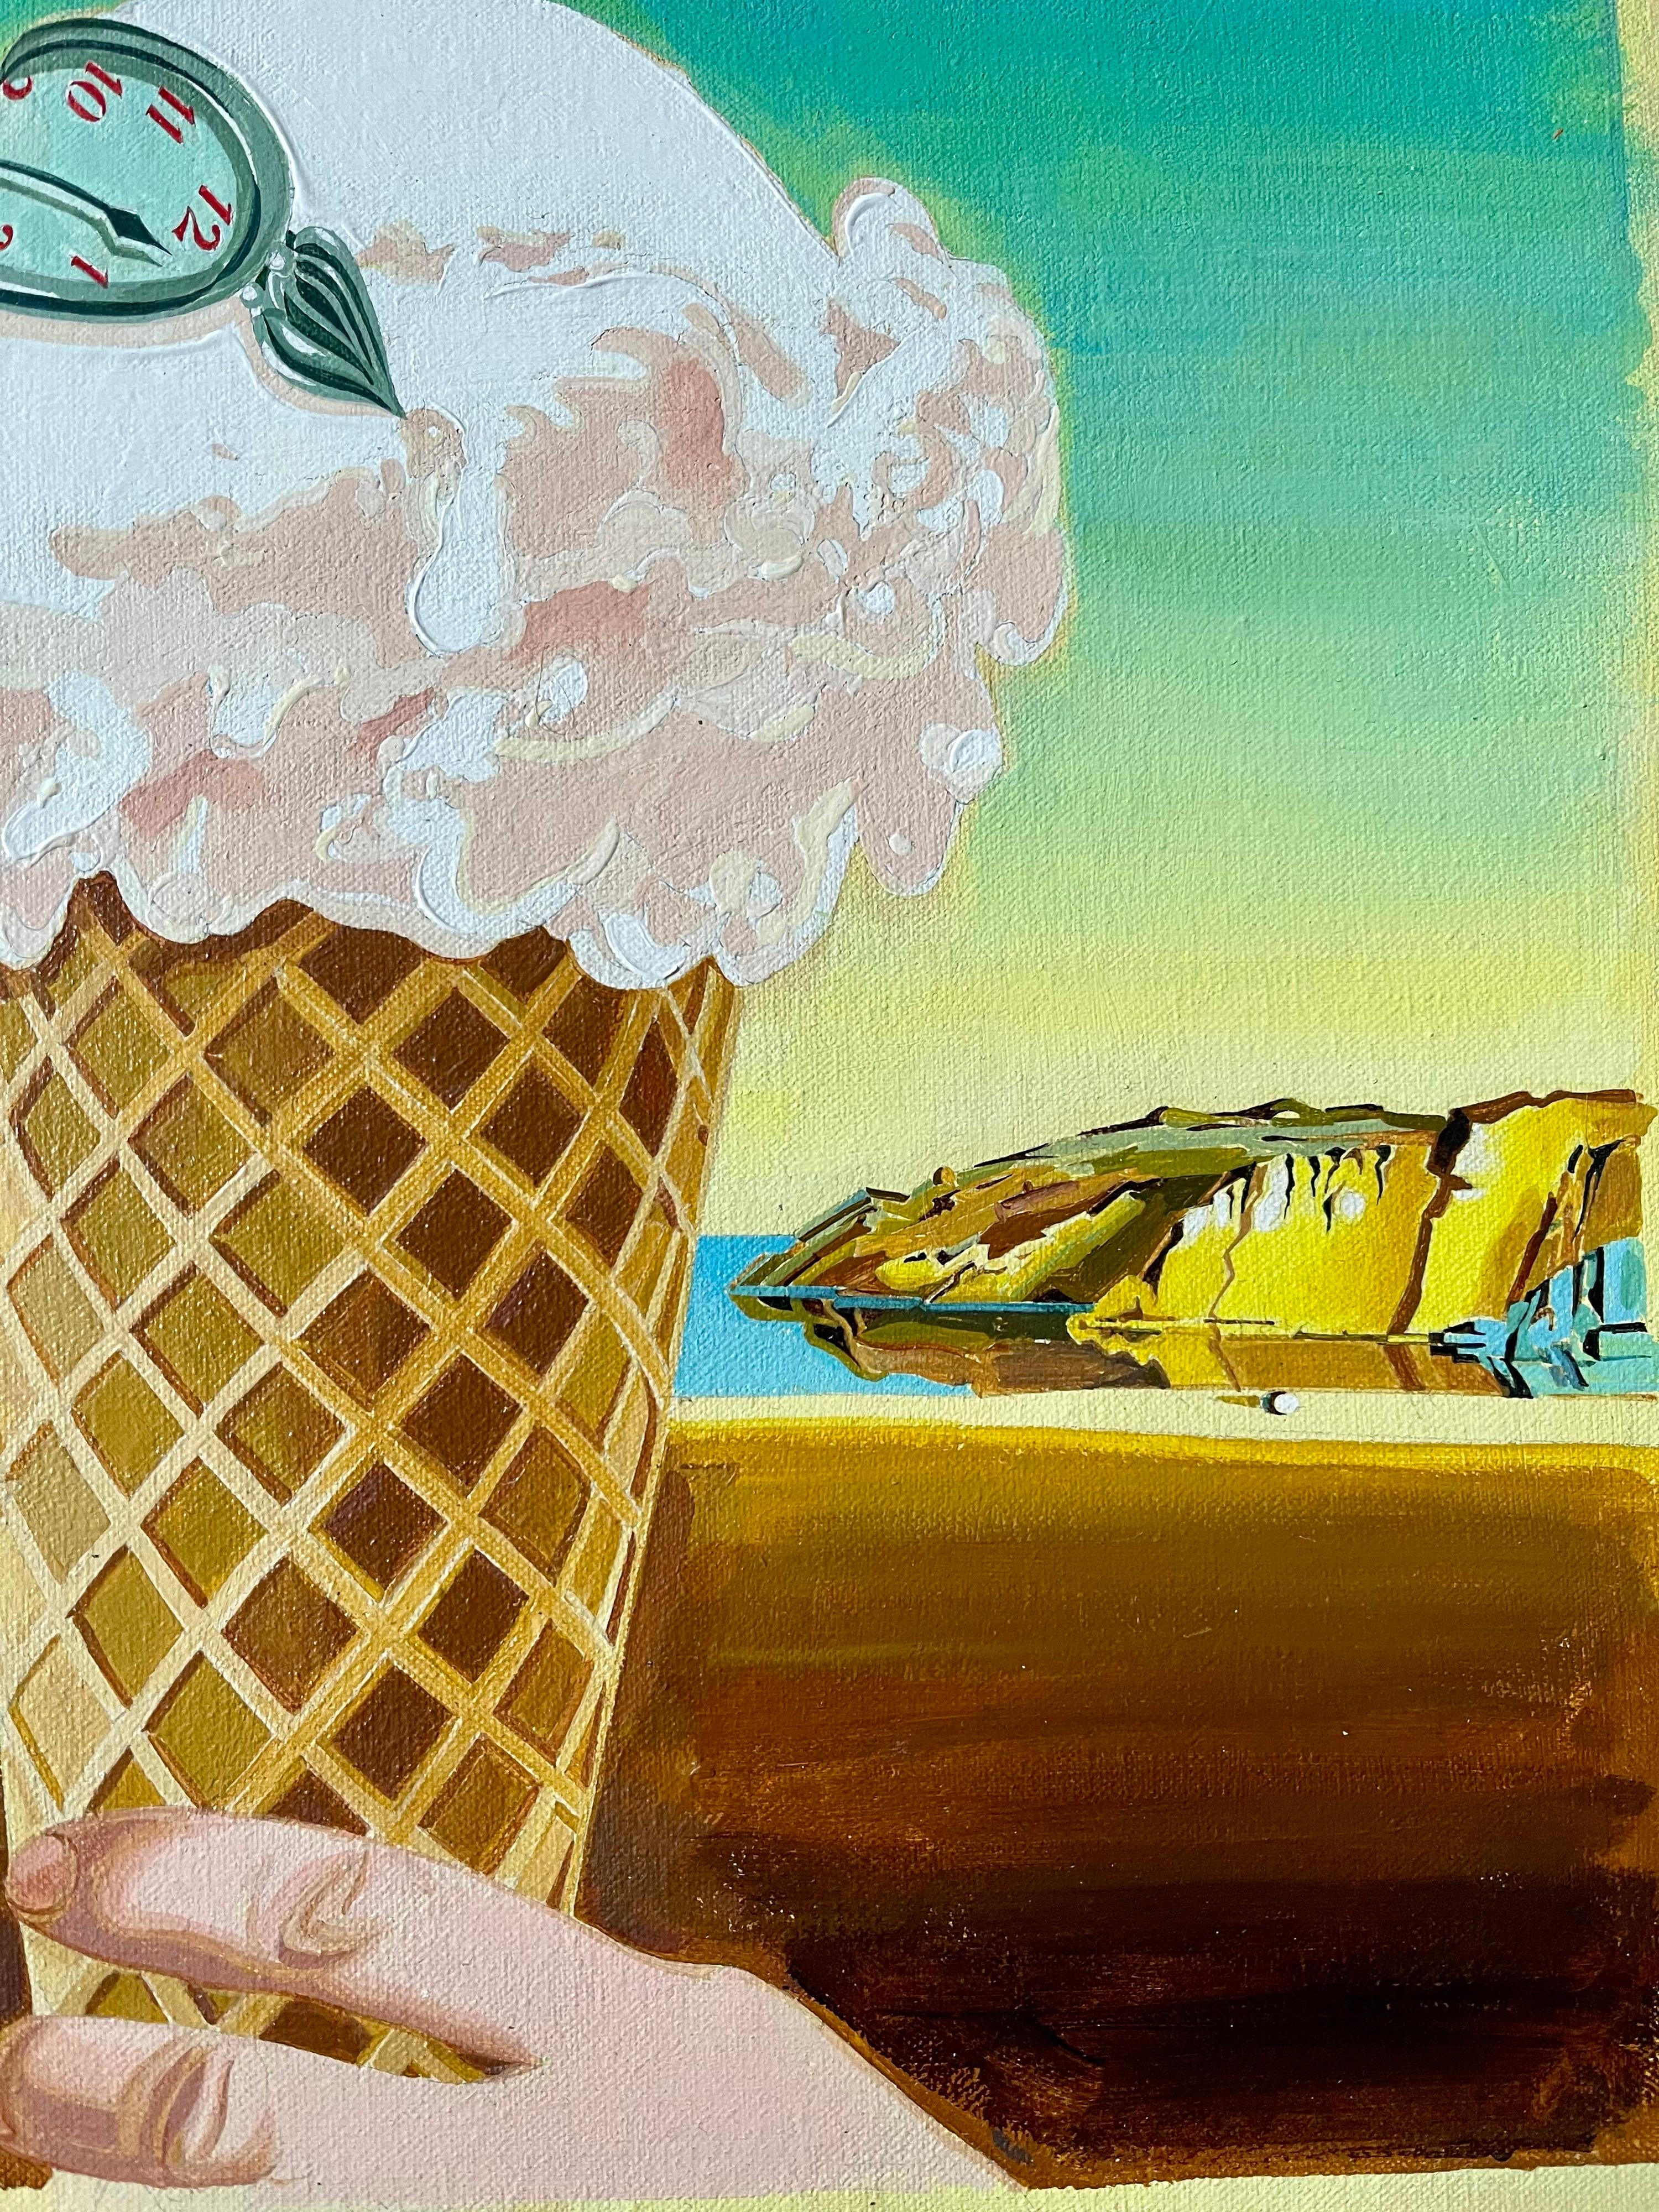 Paul A. Giovanopoulos 
Oil paintings on  canvas 
Measures approx. 23 X 23 overall including thin frame.
This one depicts an ice cream done in a photo realism pop art style super imposed over a surrealist Salvador Dali melting clock Painting. This is